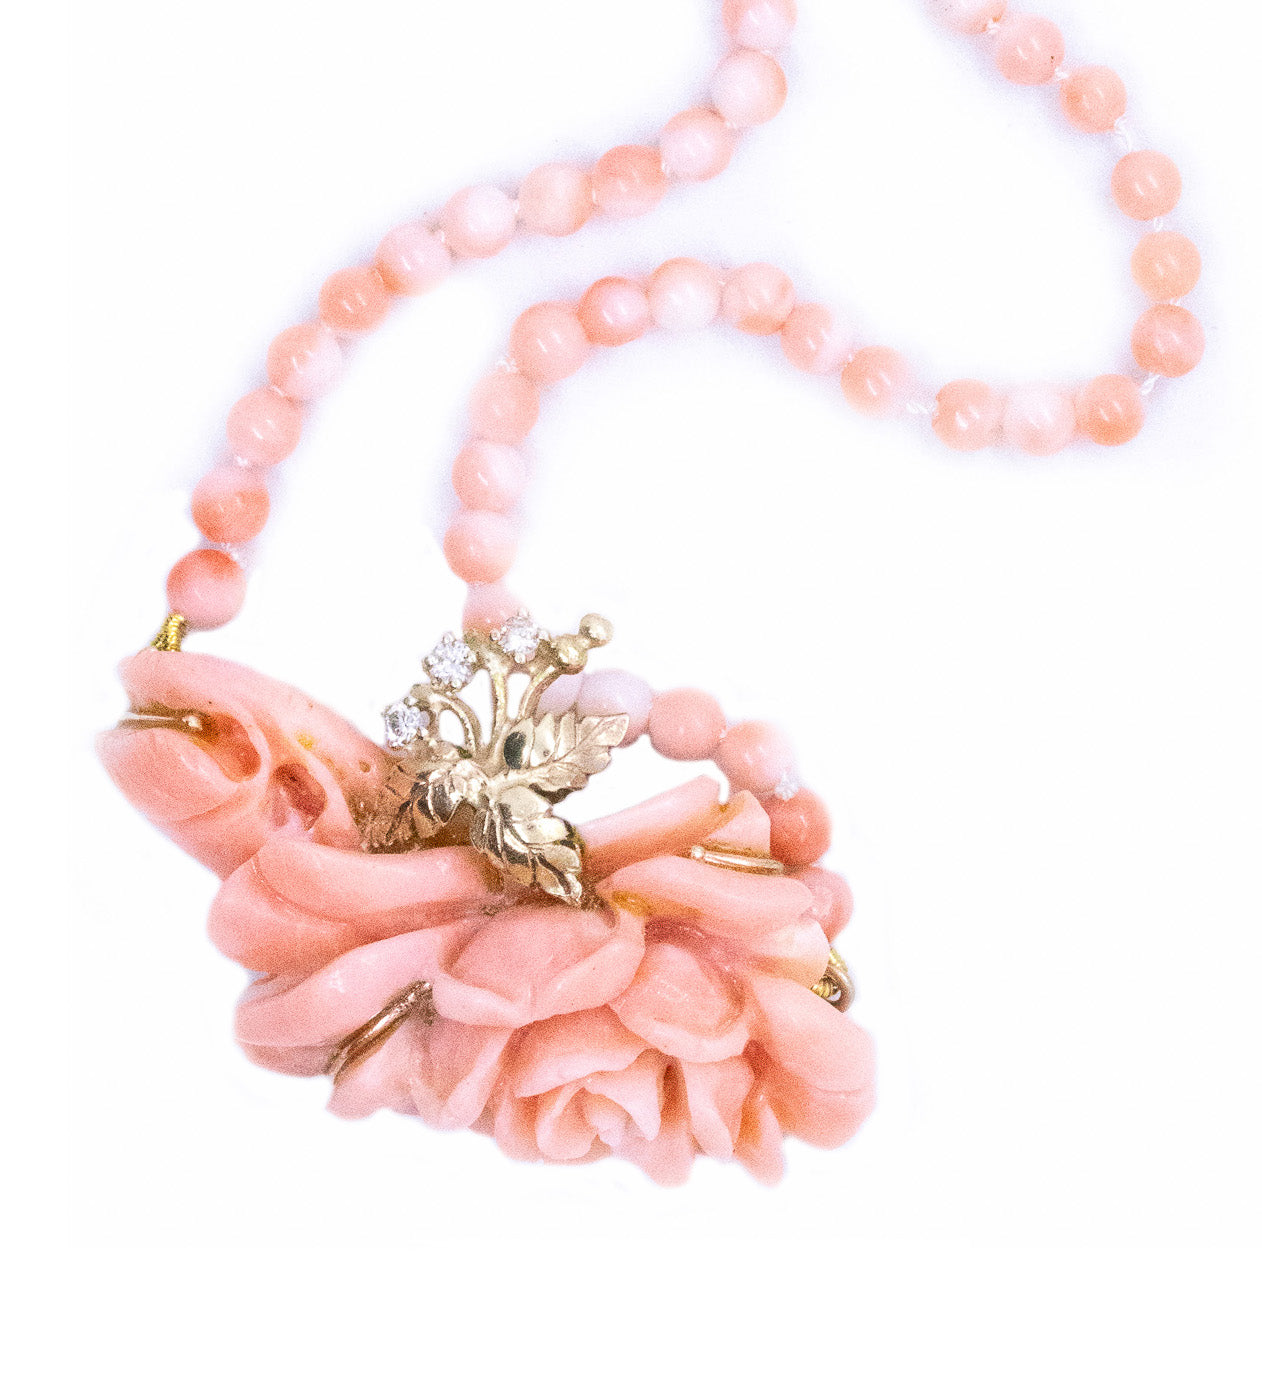 PINK CORAL AND DIAMONDS 14 KT NECKLACE